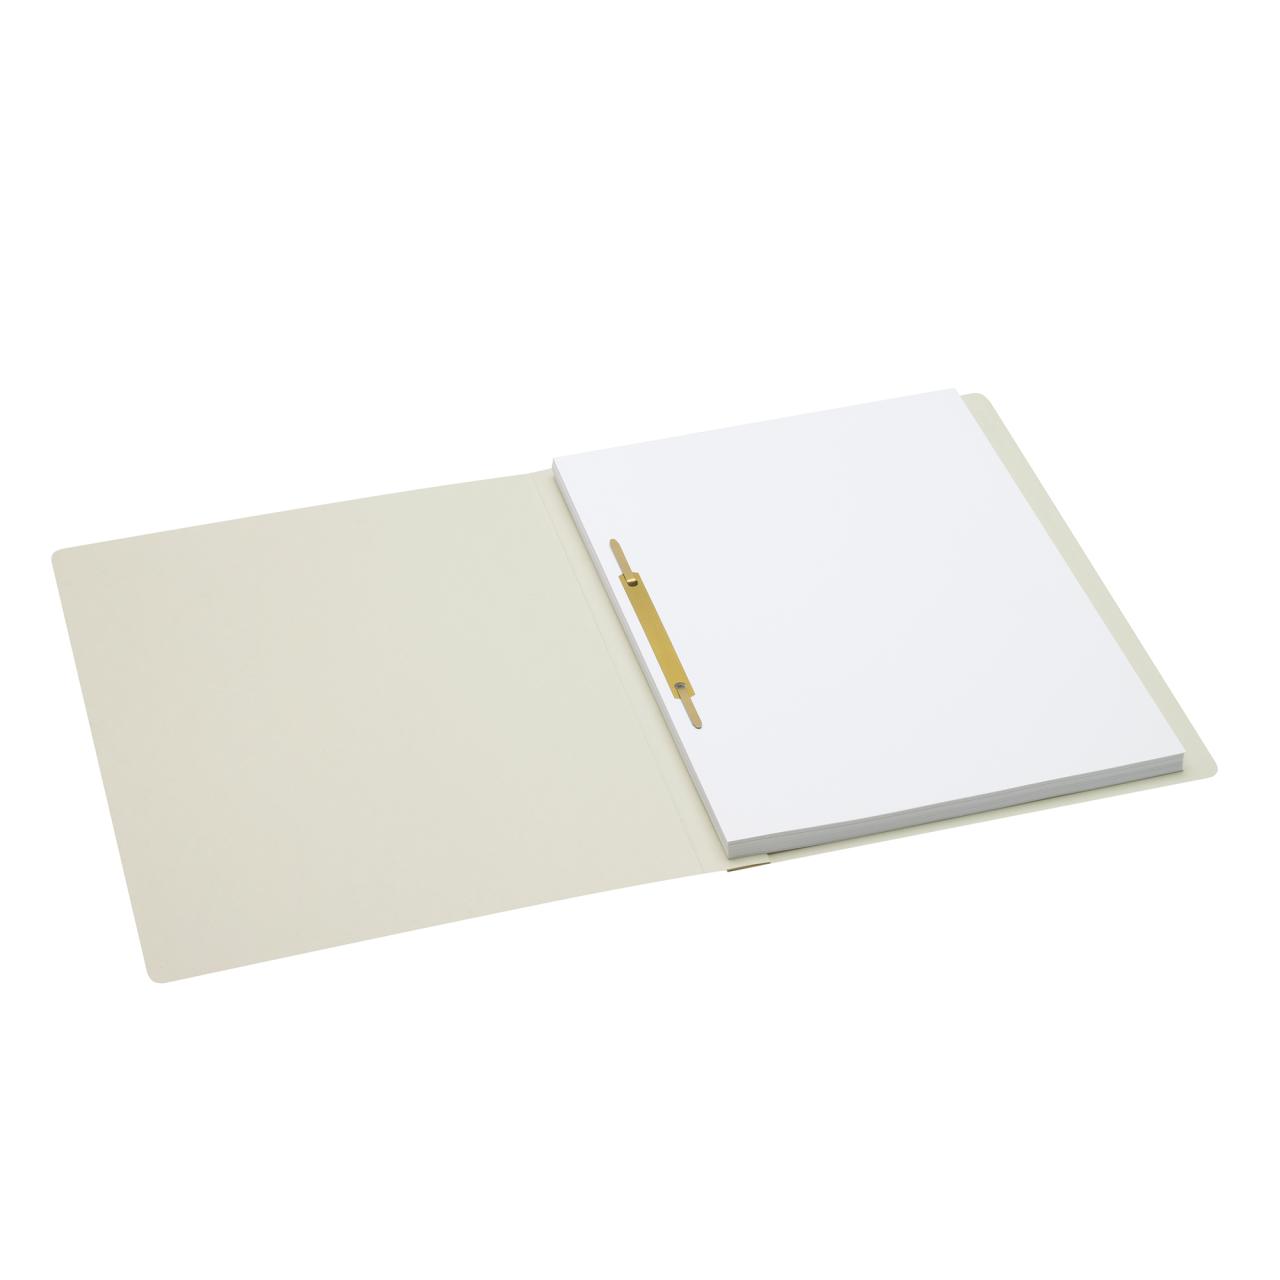 Secolor Folder with Quick Metal Fastener, A4, 100% recycled cardboard, FSC® 